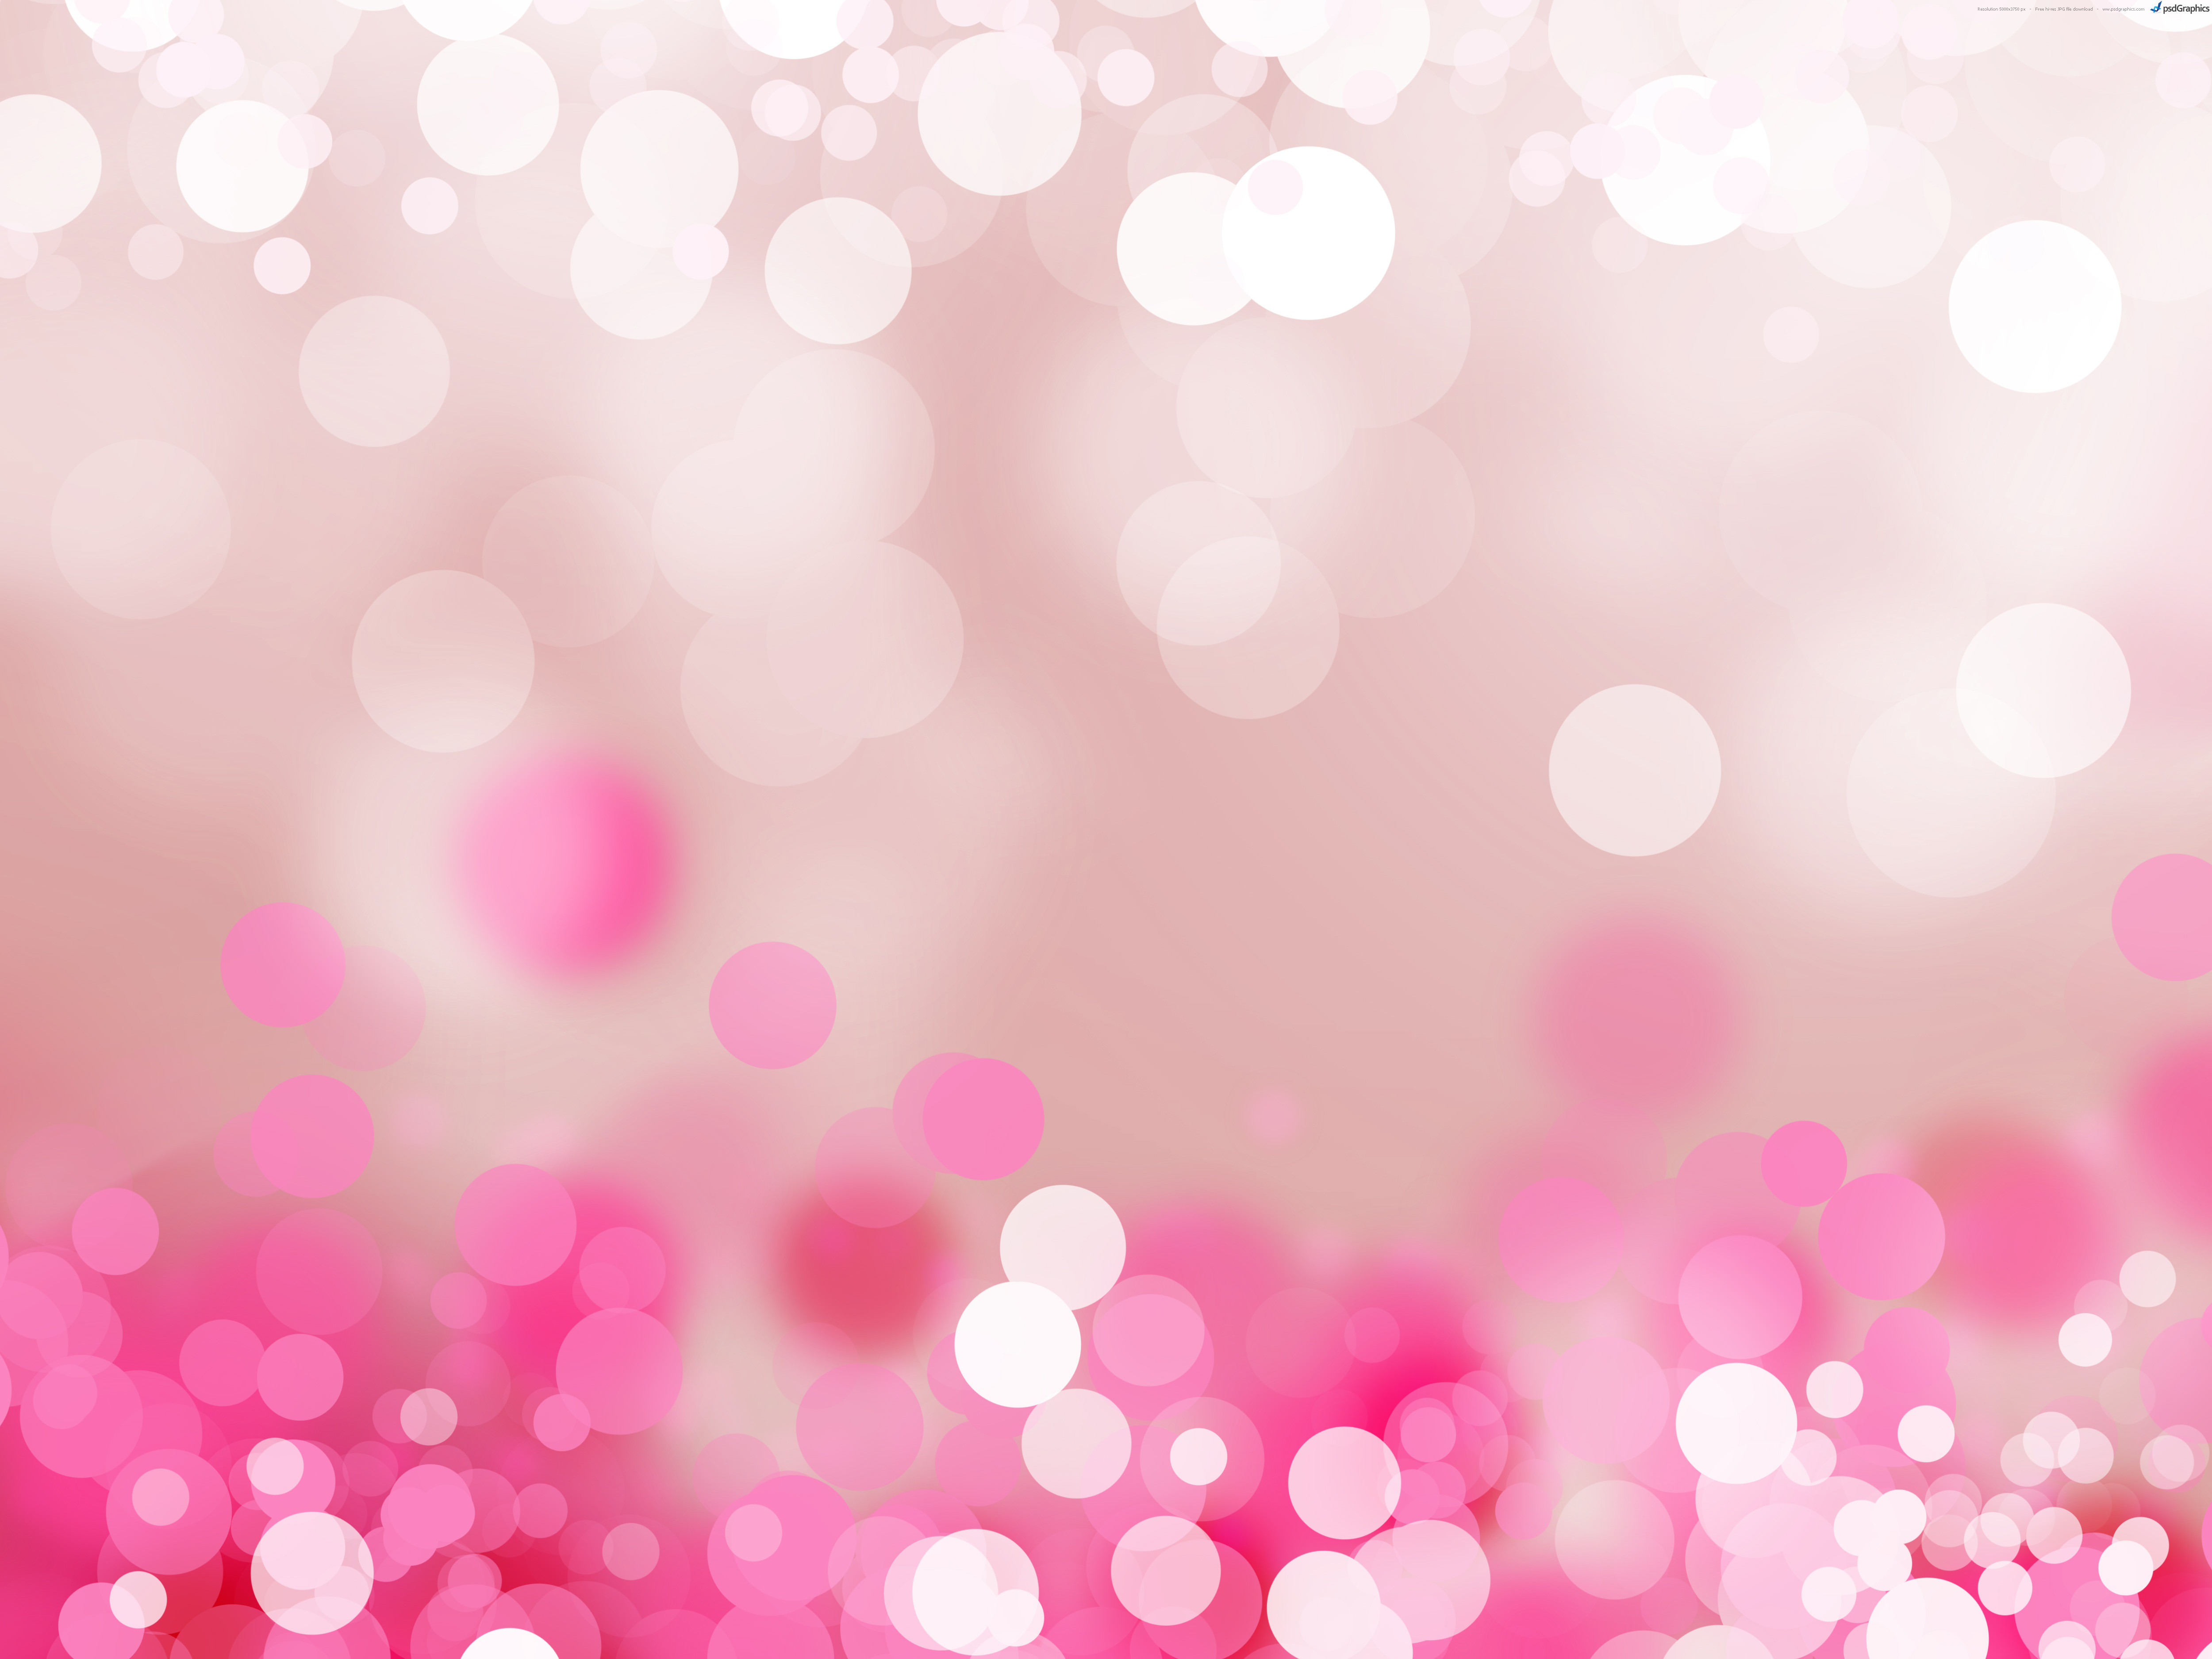 Pink background pictures